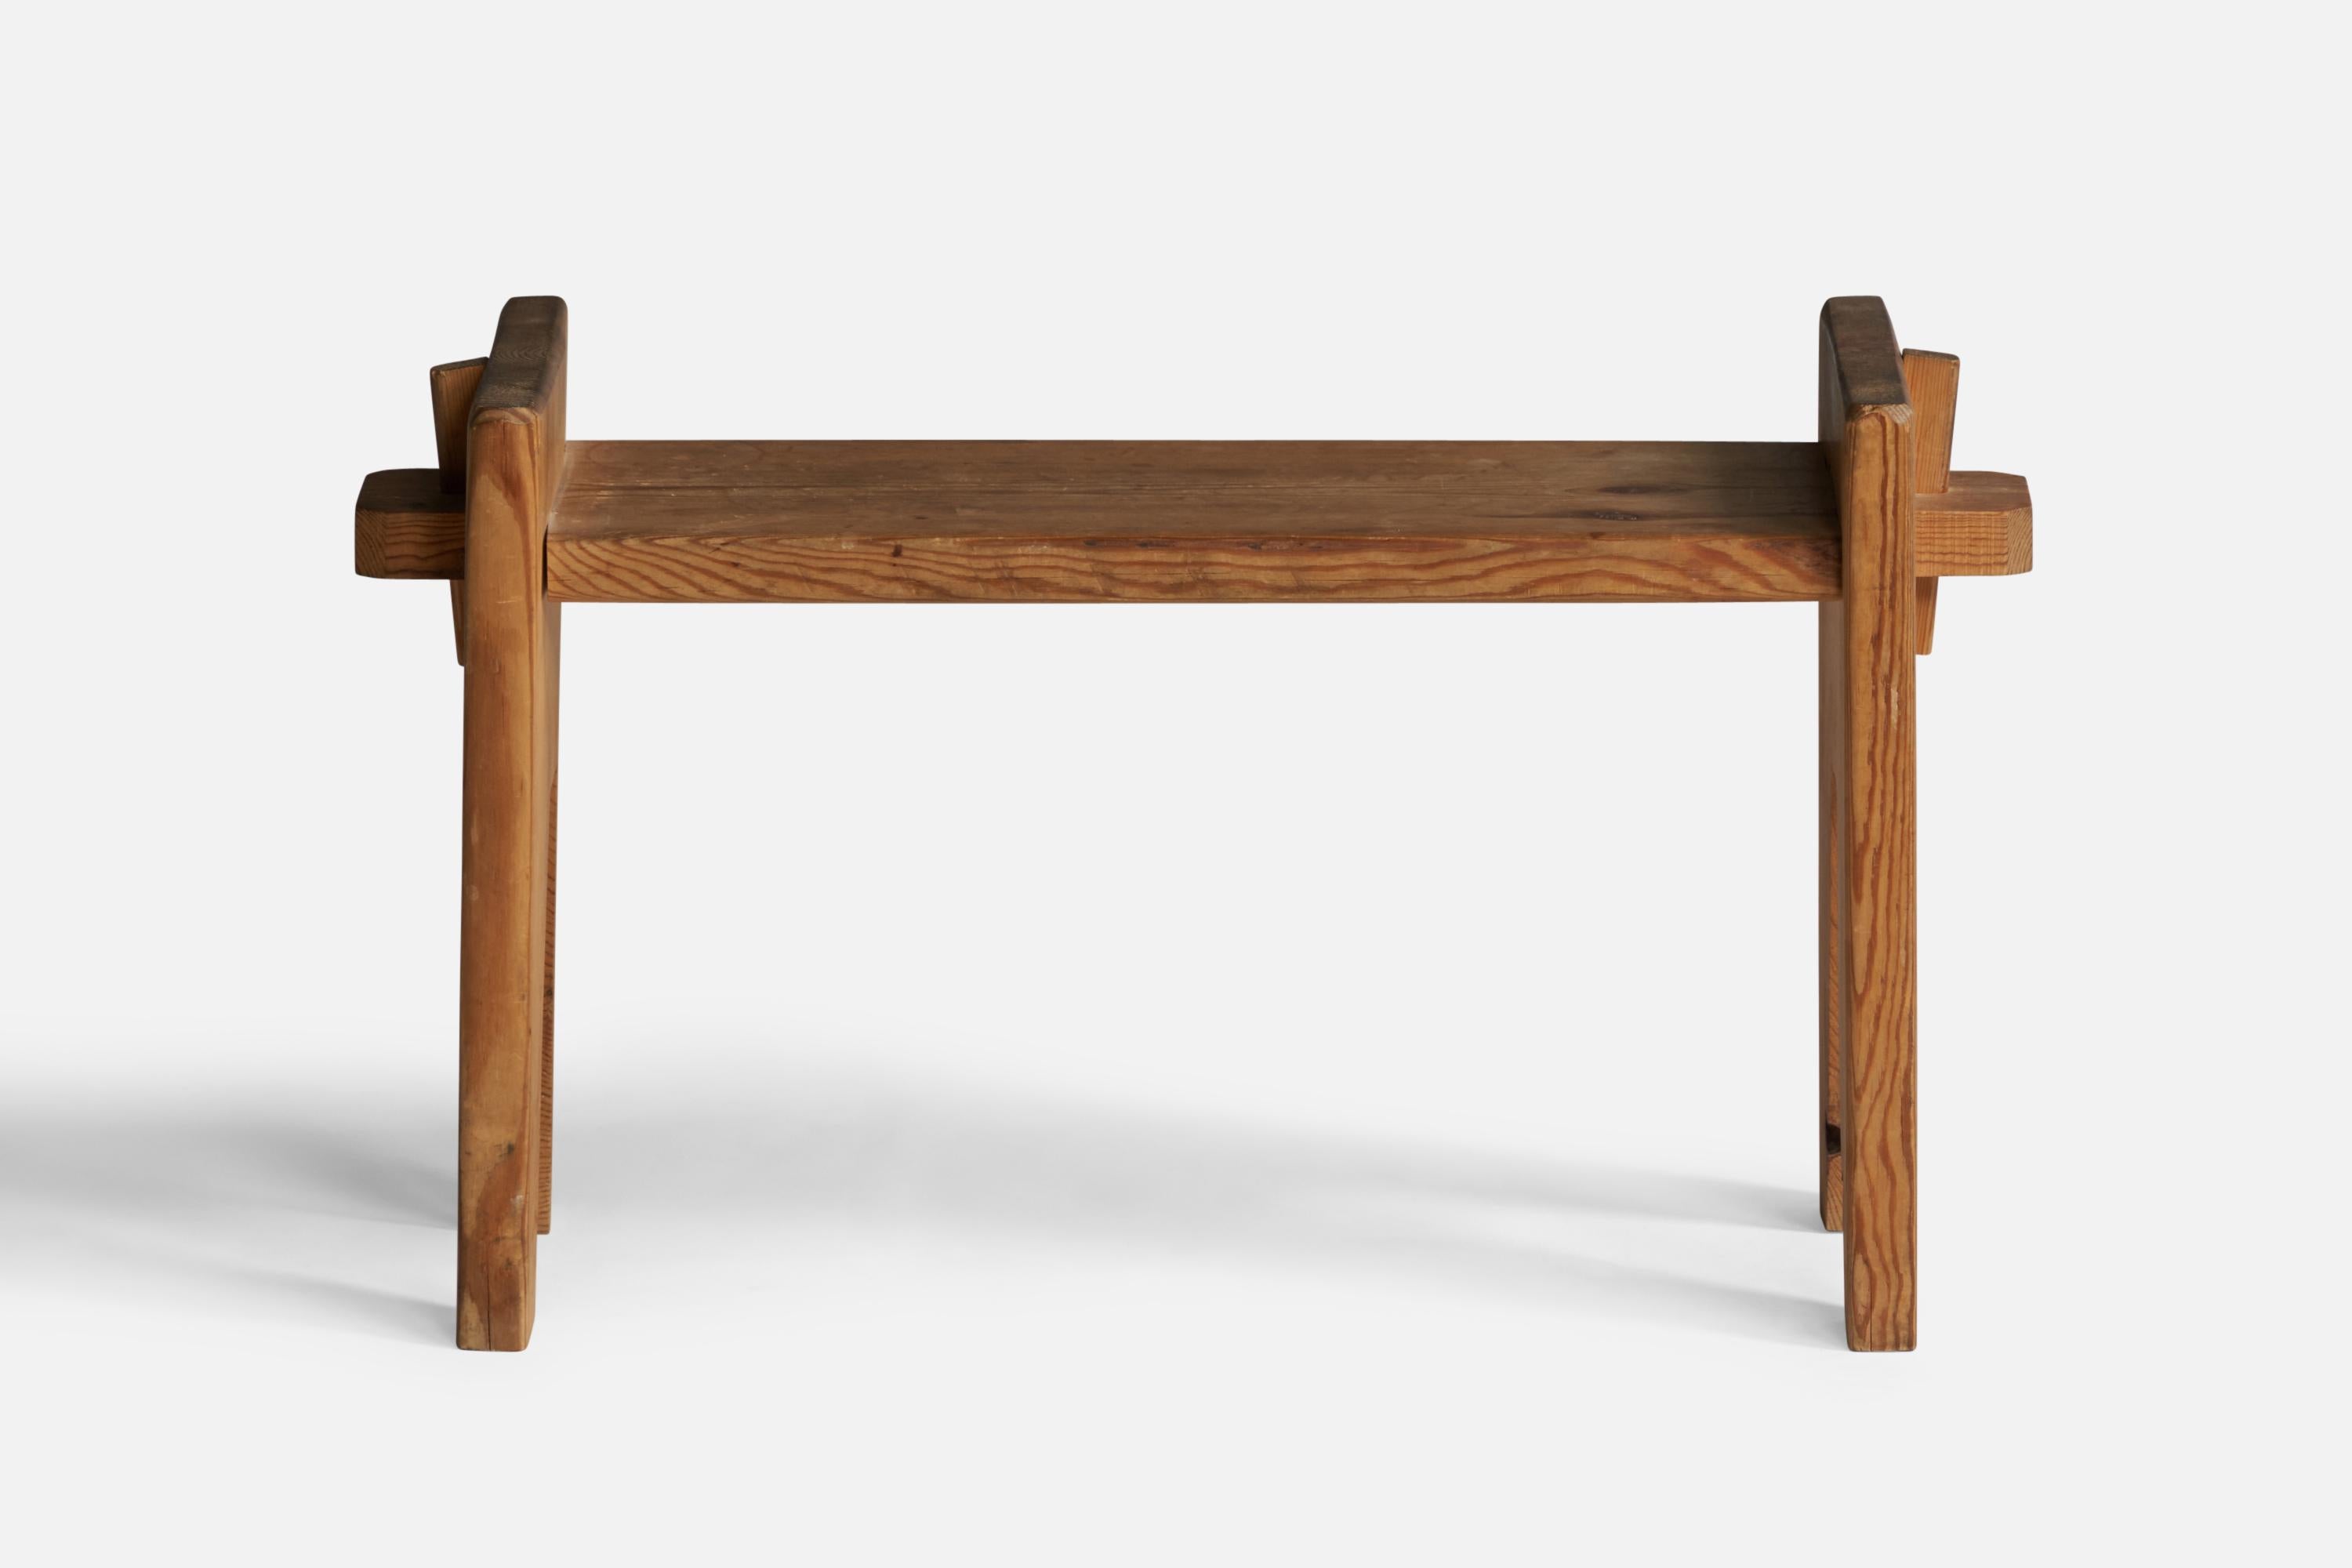 A pine stool designed and produced in Sweden, c. 1940s.

Seat height: 12.5”